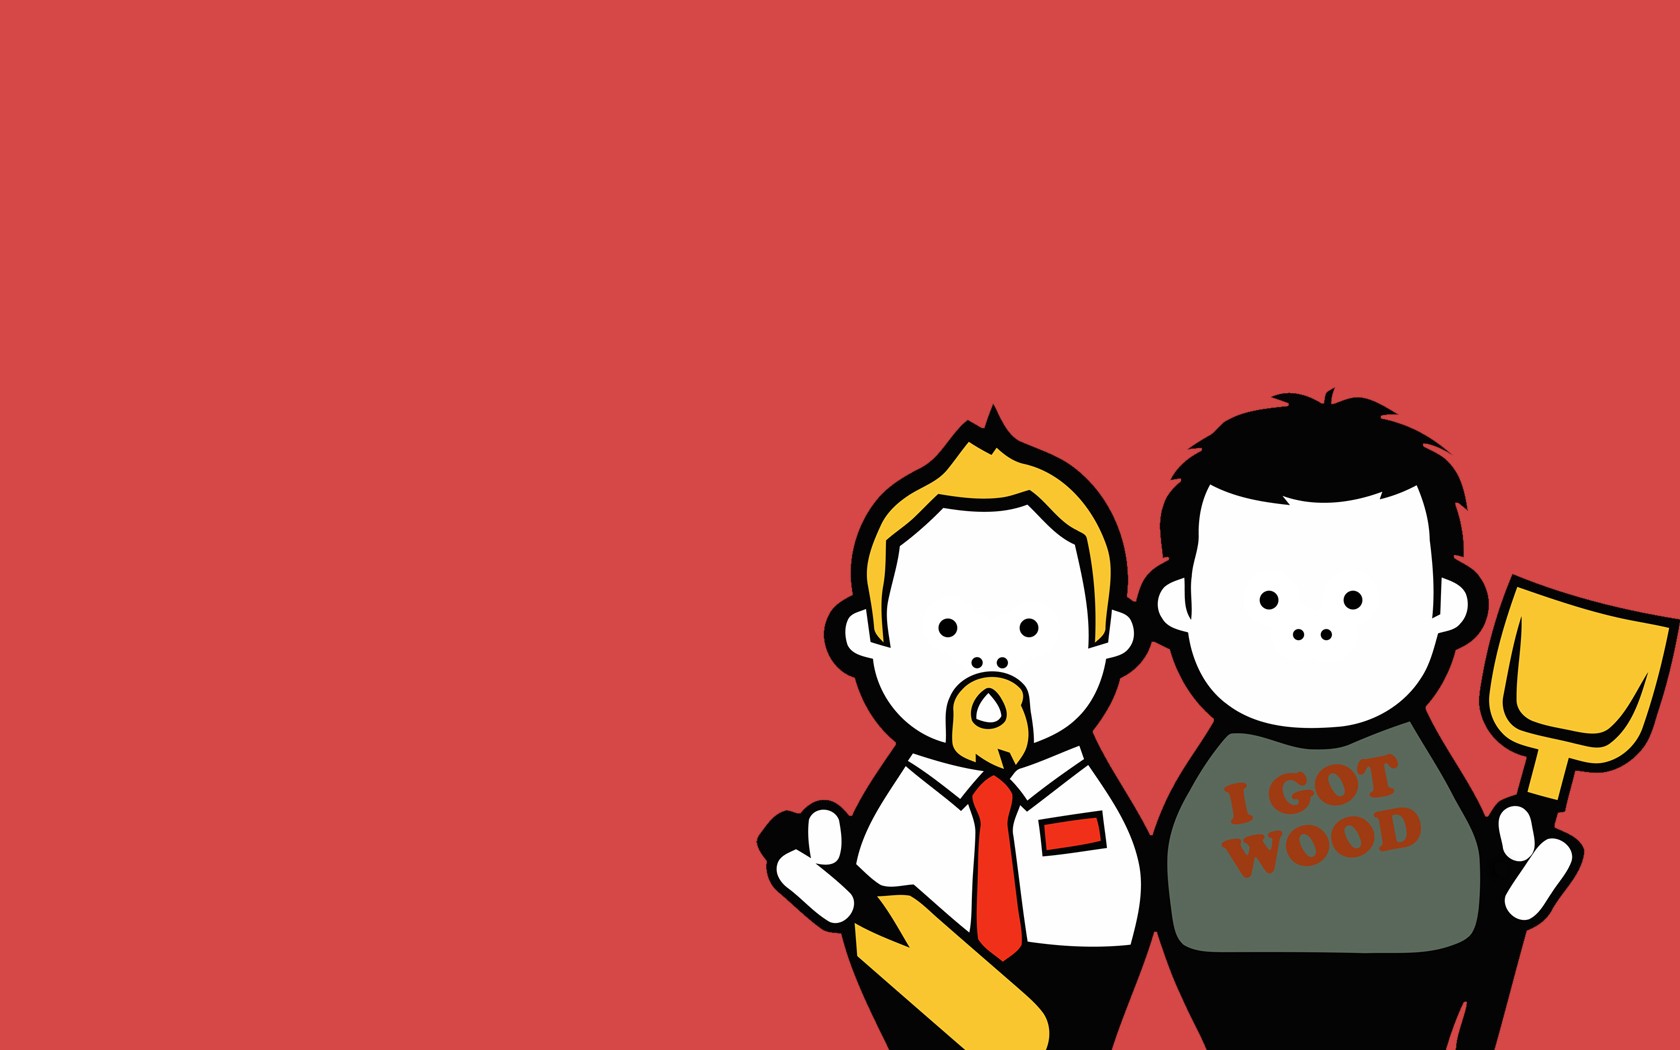 General 1680x1050 Shaun of the Dead movies Simon Pegg Nick Frost Blood and Ice Cream red background